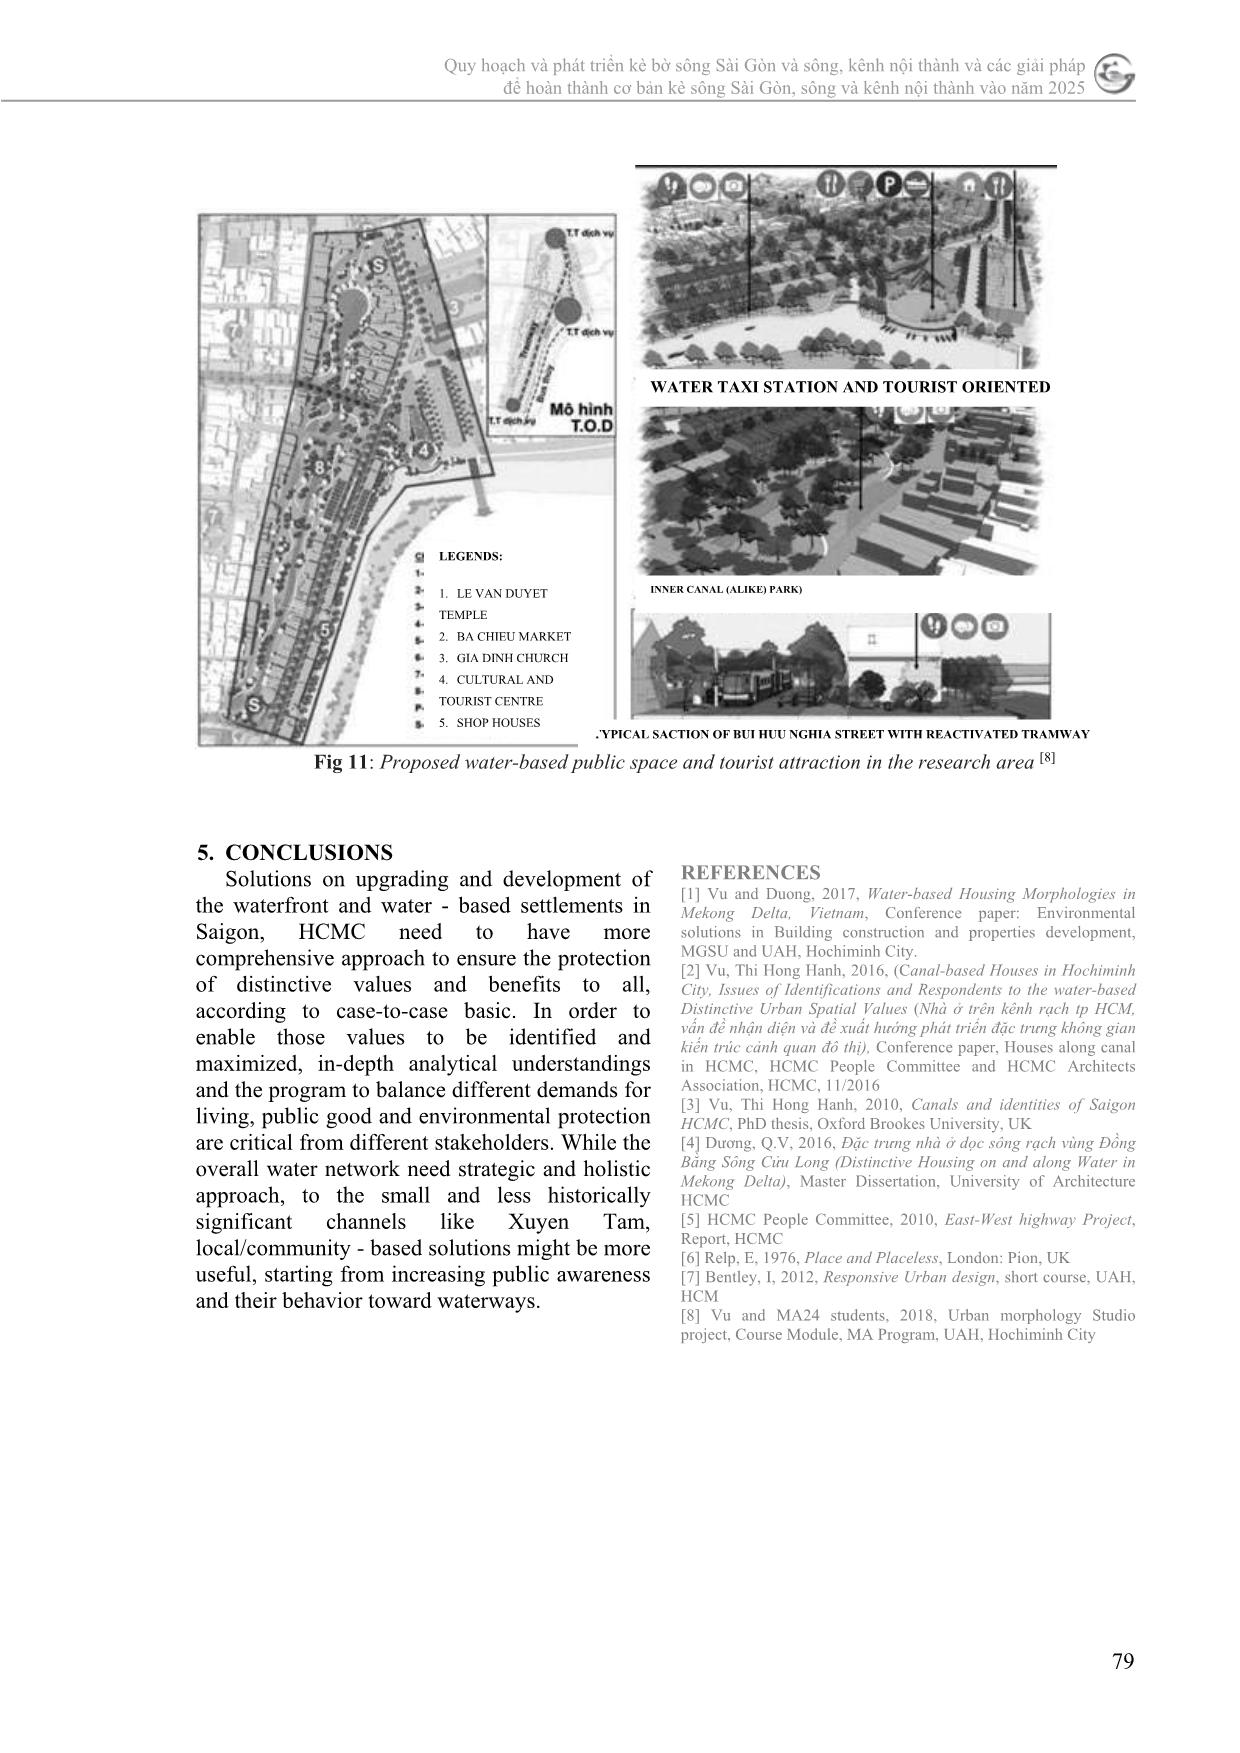 Waterways and urban morphology of Saigon hochiminh city case study of xuyen tam canal area in ward 1 and 2, Binh Thanh district trang 10